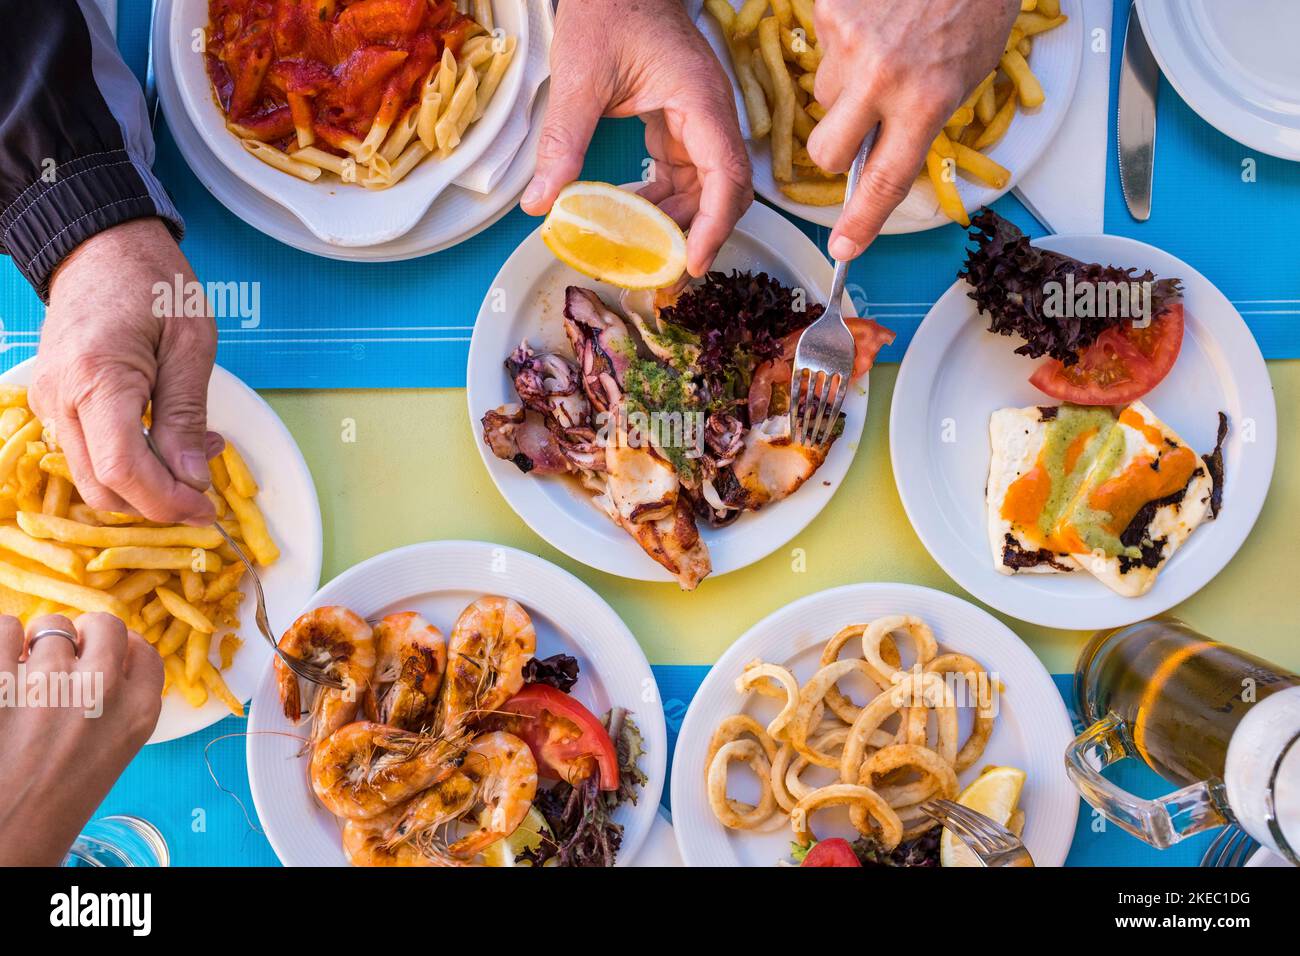 beautiful close up of table woth gourmet and marine food like fish and chips with hands taking it - group of people eating together - above and top view Stock Photo